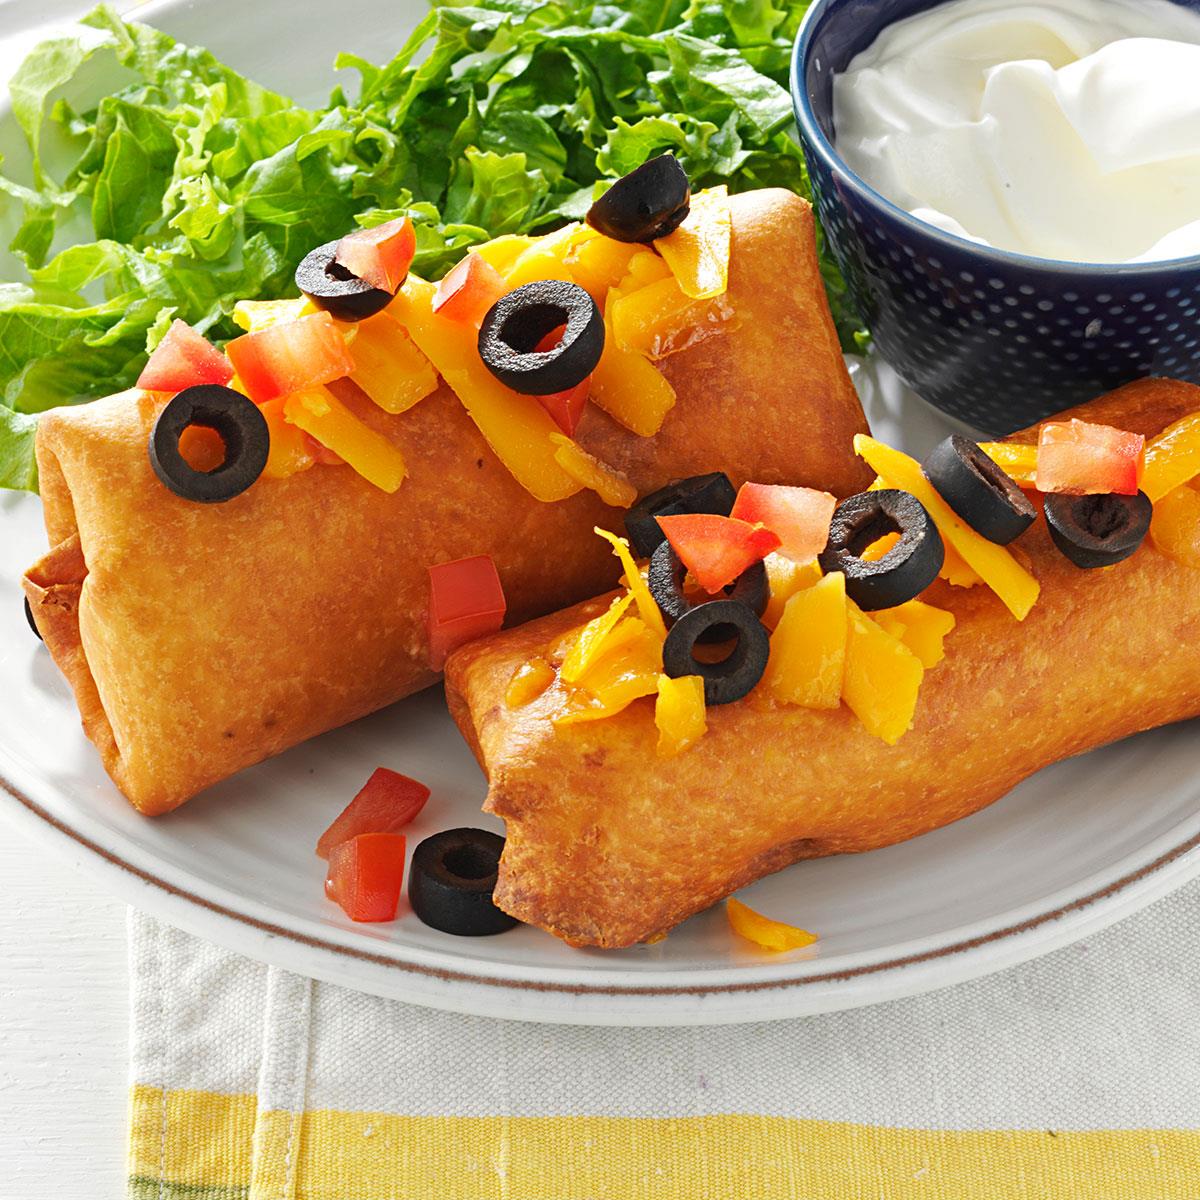 Beef and Bean Chimichangas_image